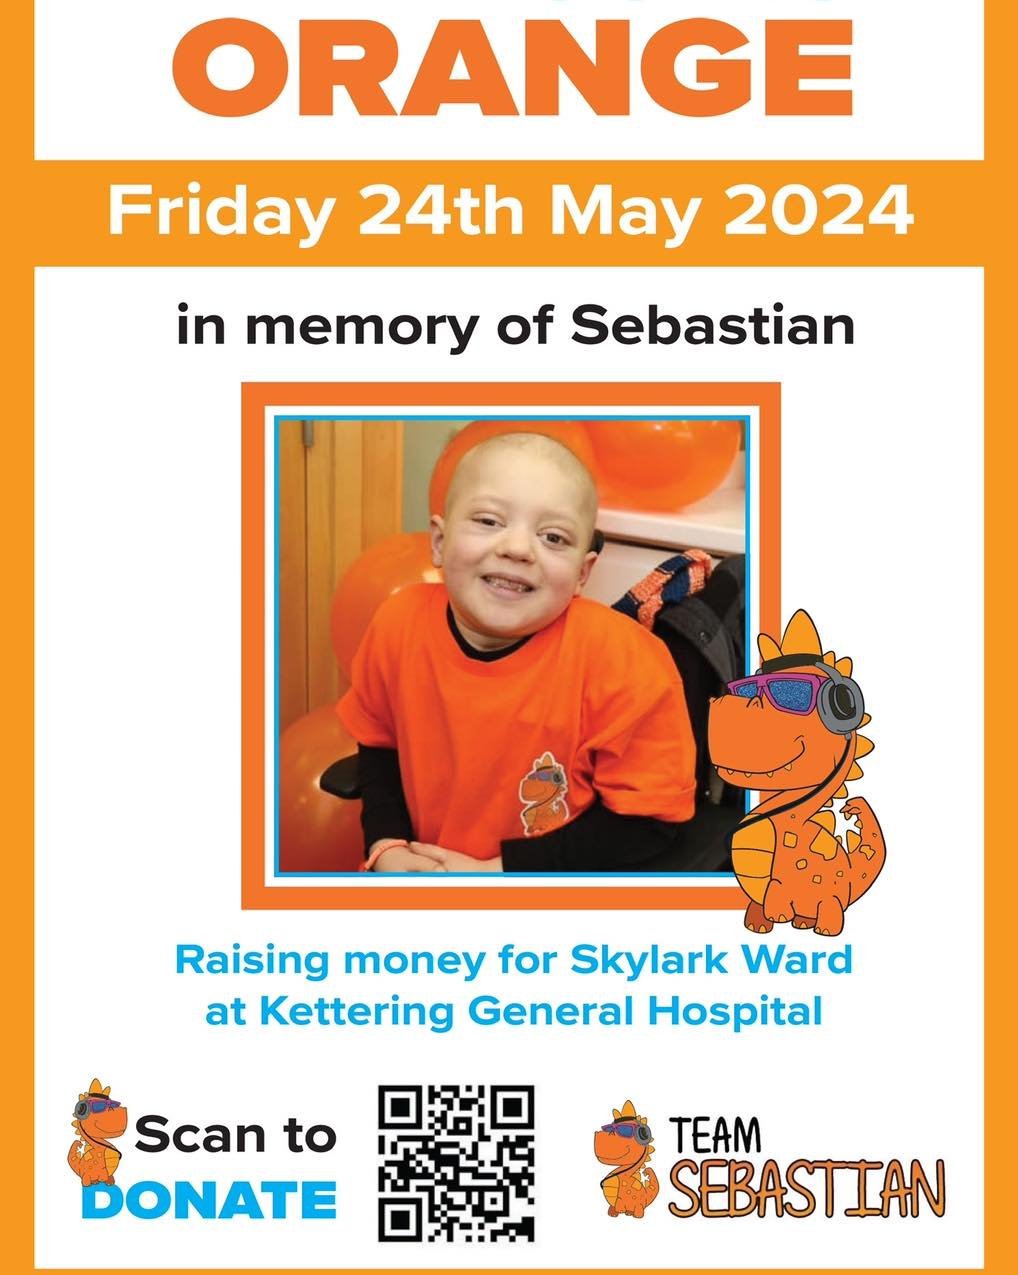 I supported Team Sebastian last year by donating 6 EFT (Emotional Freedom Technique) Tapping sessions in the last year&rsquo;s Auction of Promises. Kettering and the surrounding community united to help fundraise for Sebastian&rsquo;s lifesaving trea